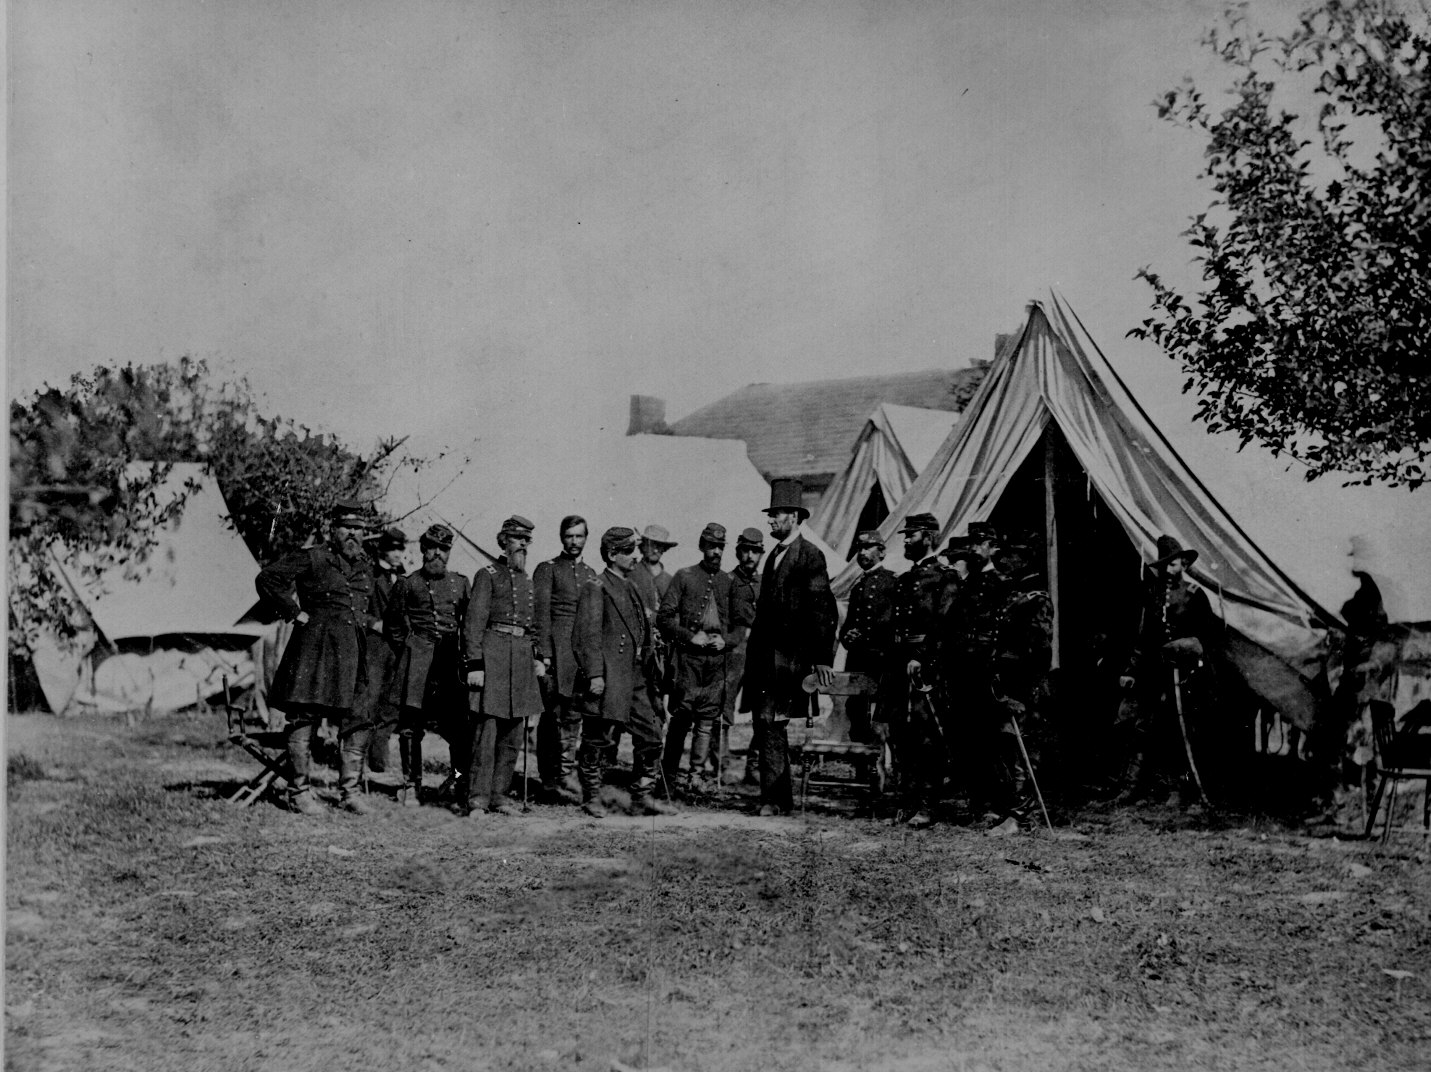 Frustrated by General McClellan’s hesitation to pursue a badly battered Confederate Army following the Battle of Antietam, Lincoln visited the battlefield in October 1862 to impress upon the general the need to aggressively pursue Lee’s army. McClellan continued his cautious pursuit, and Lincoln subsequently replaced him with General Ambrose Burnside.